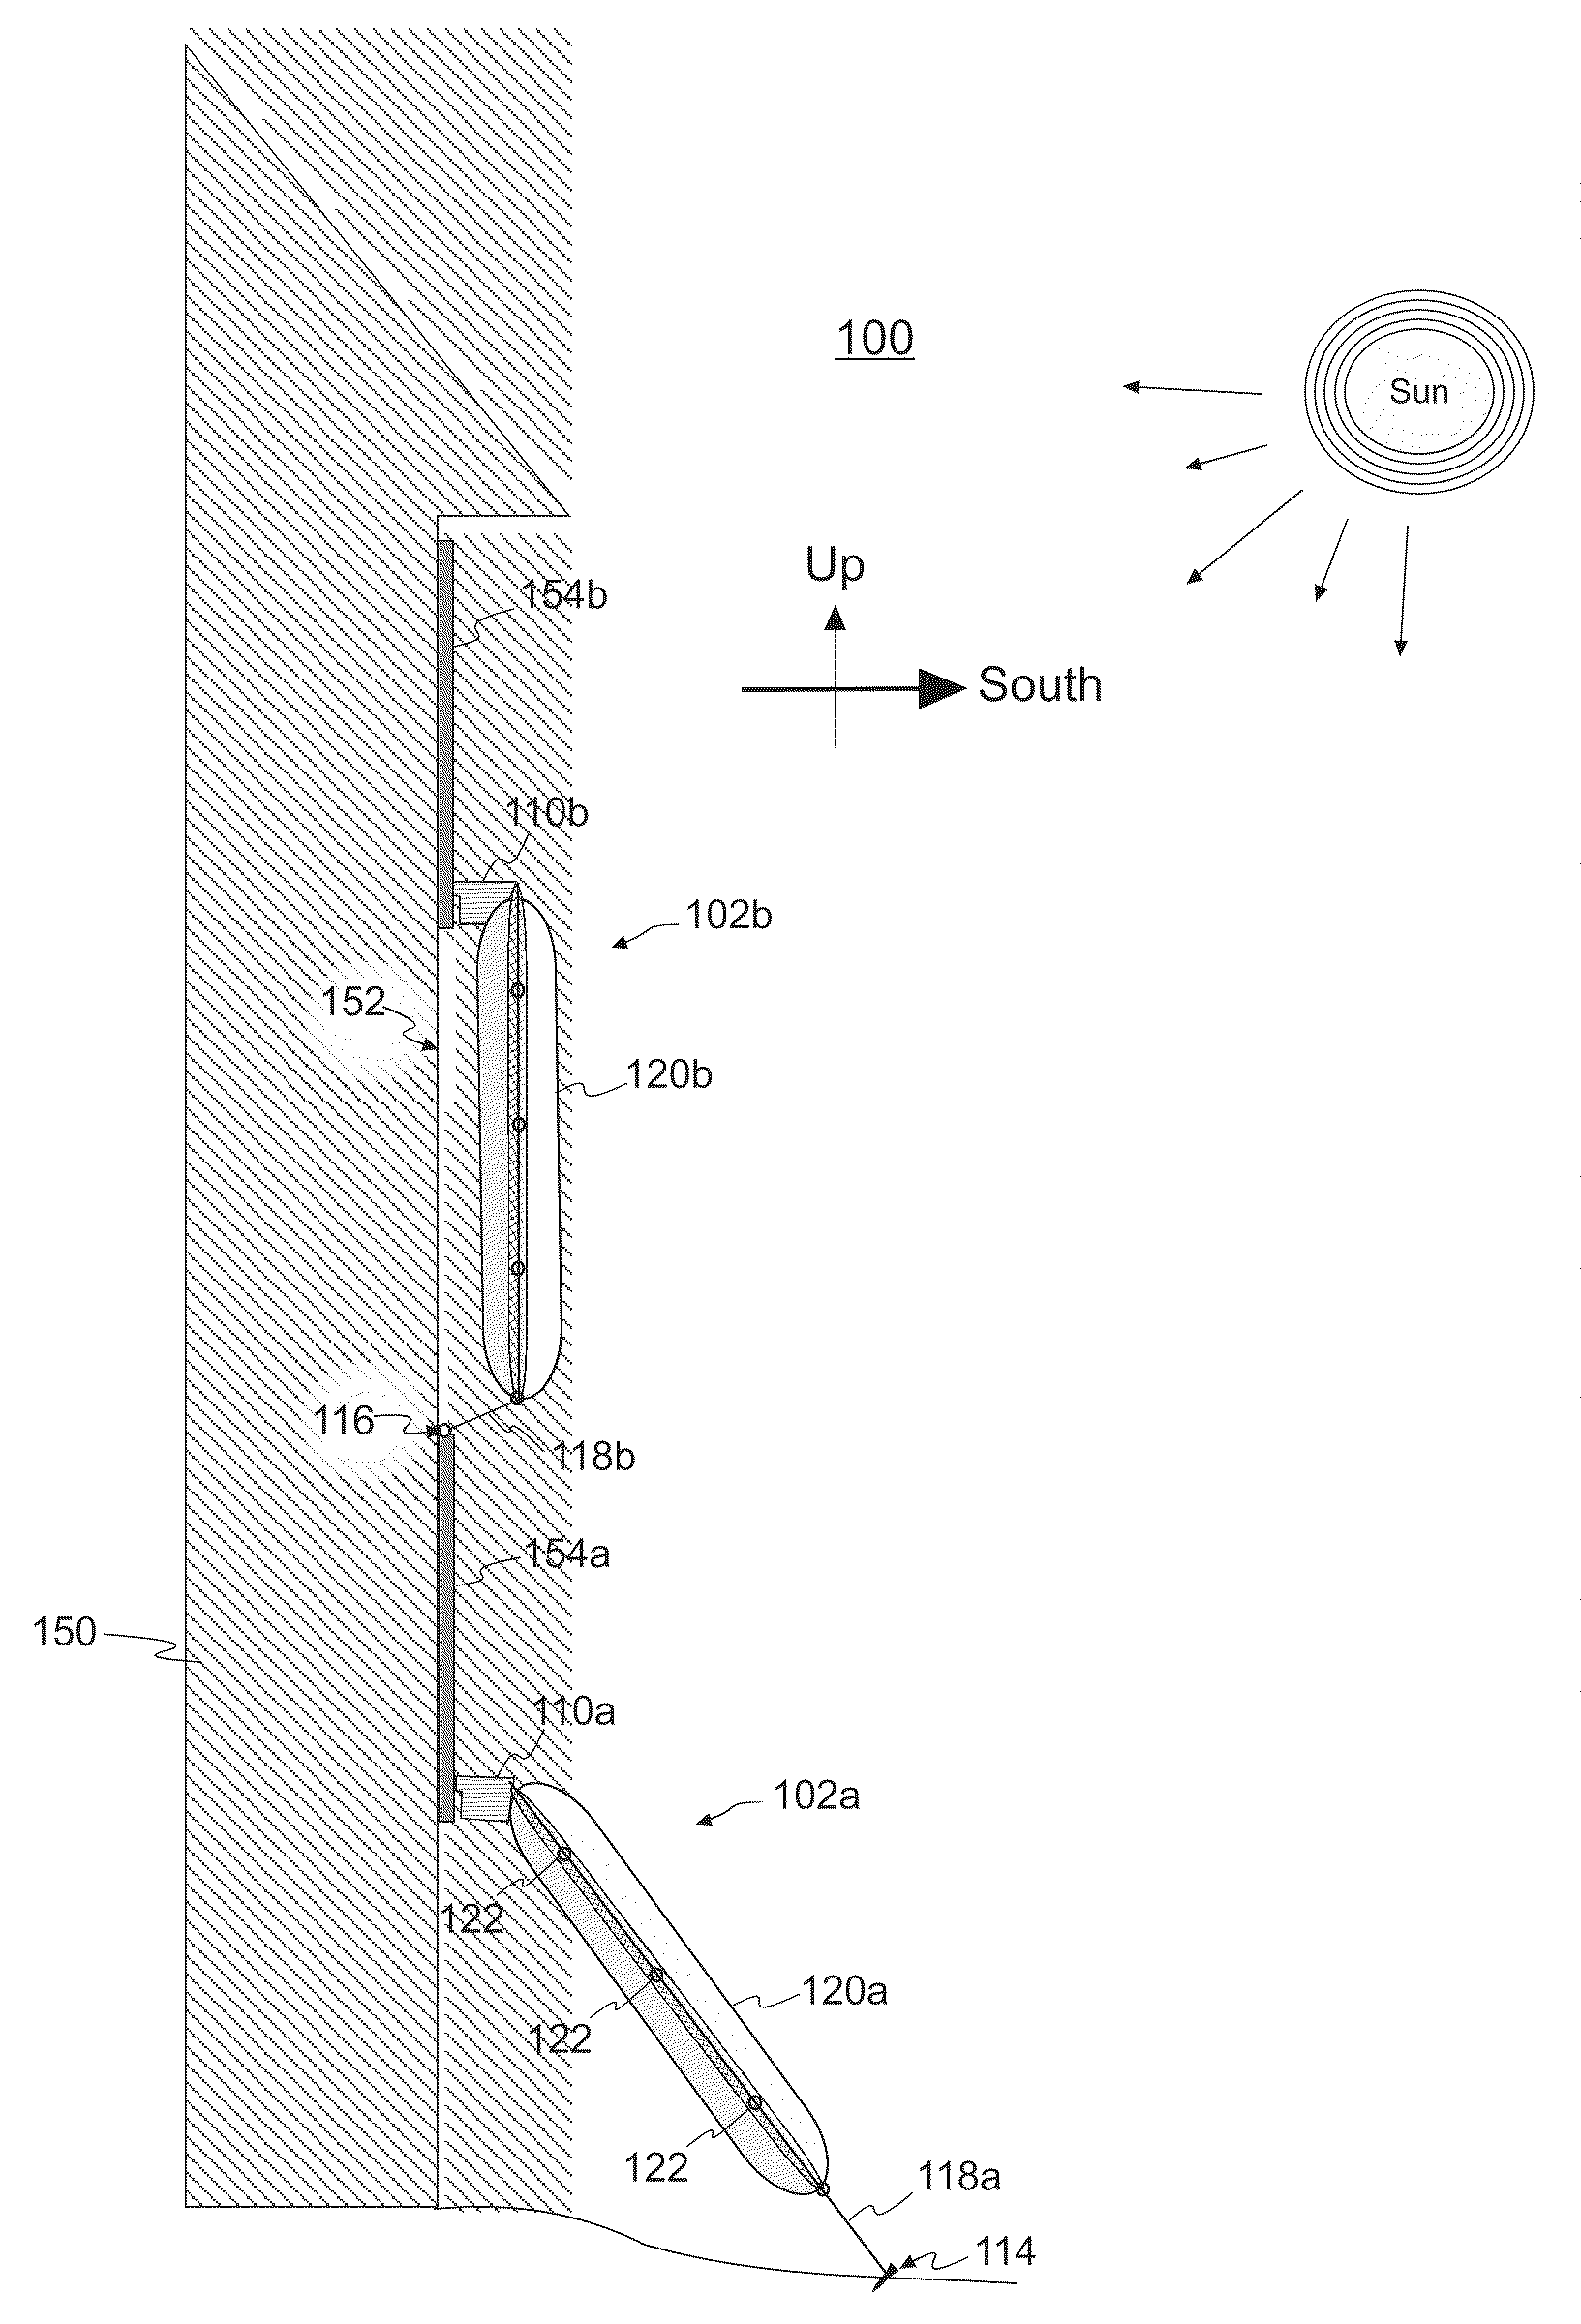 Portable solar-heating system having an inflatable solar collector